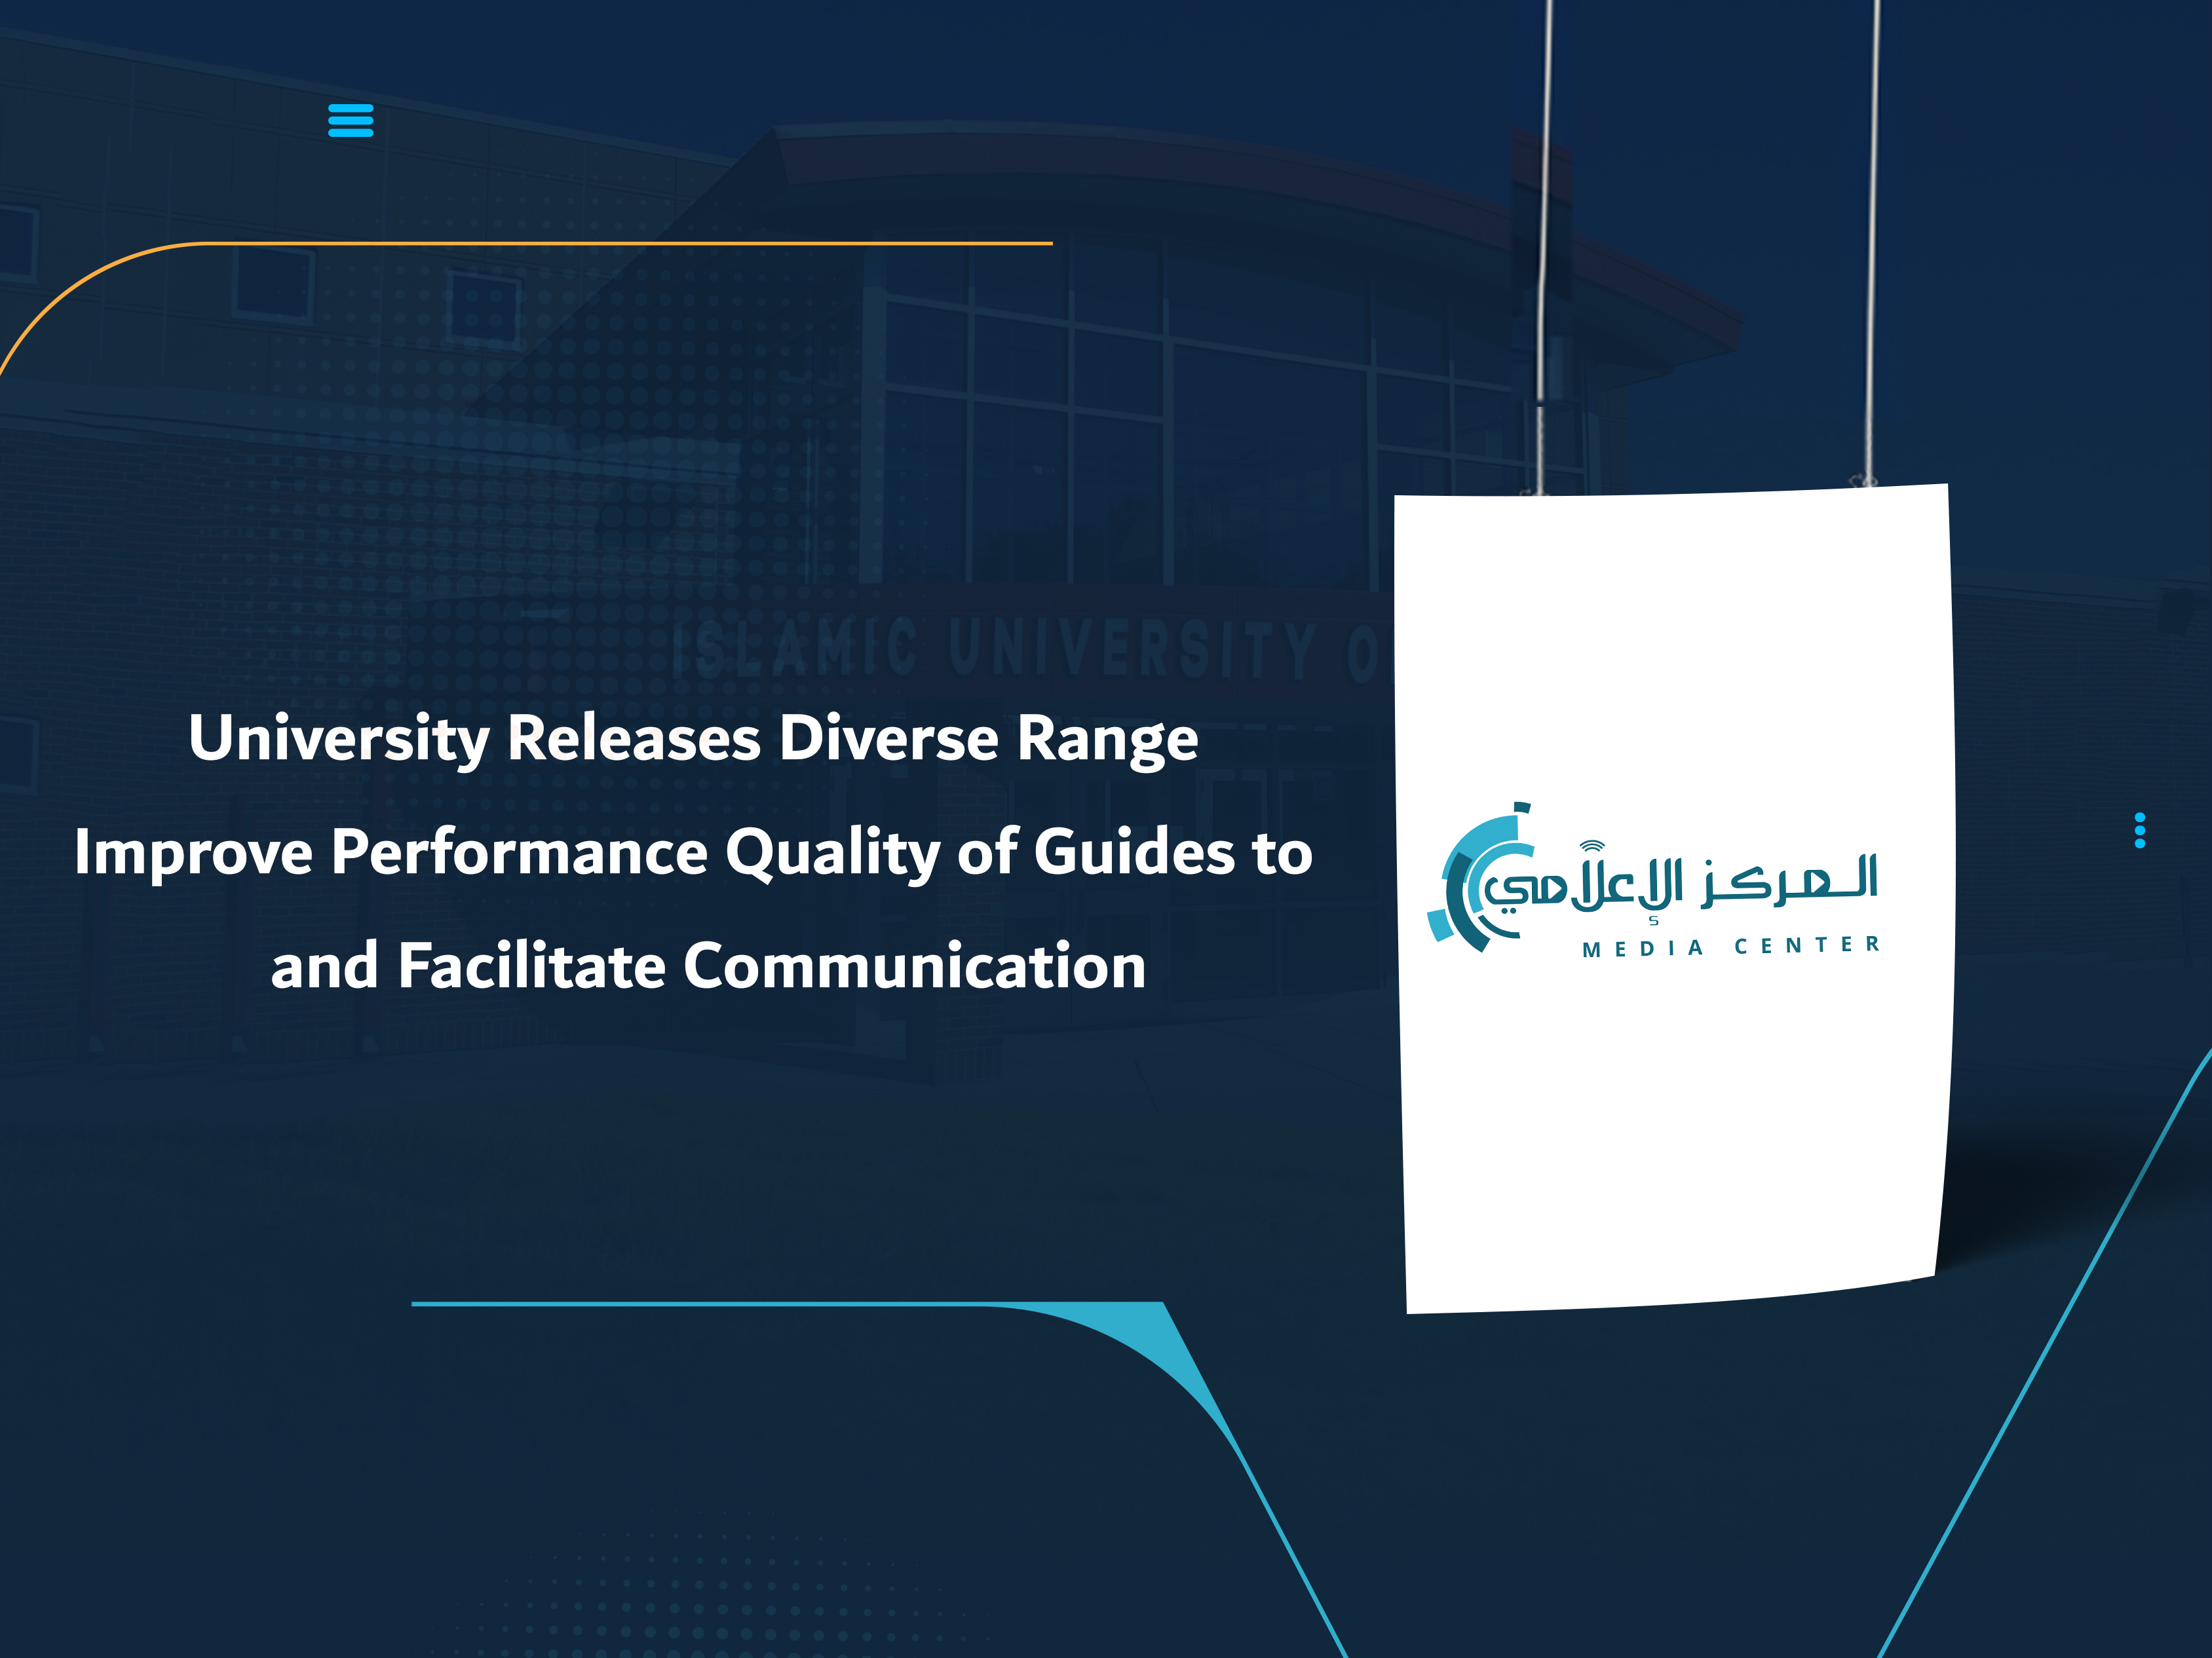 University Releases Diverse Range of Guides to Improve Performance Quality and Facilitate Communication